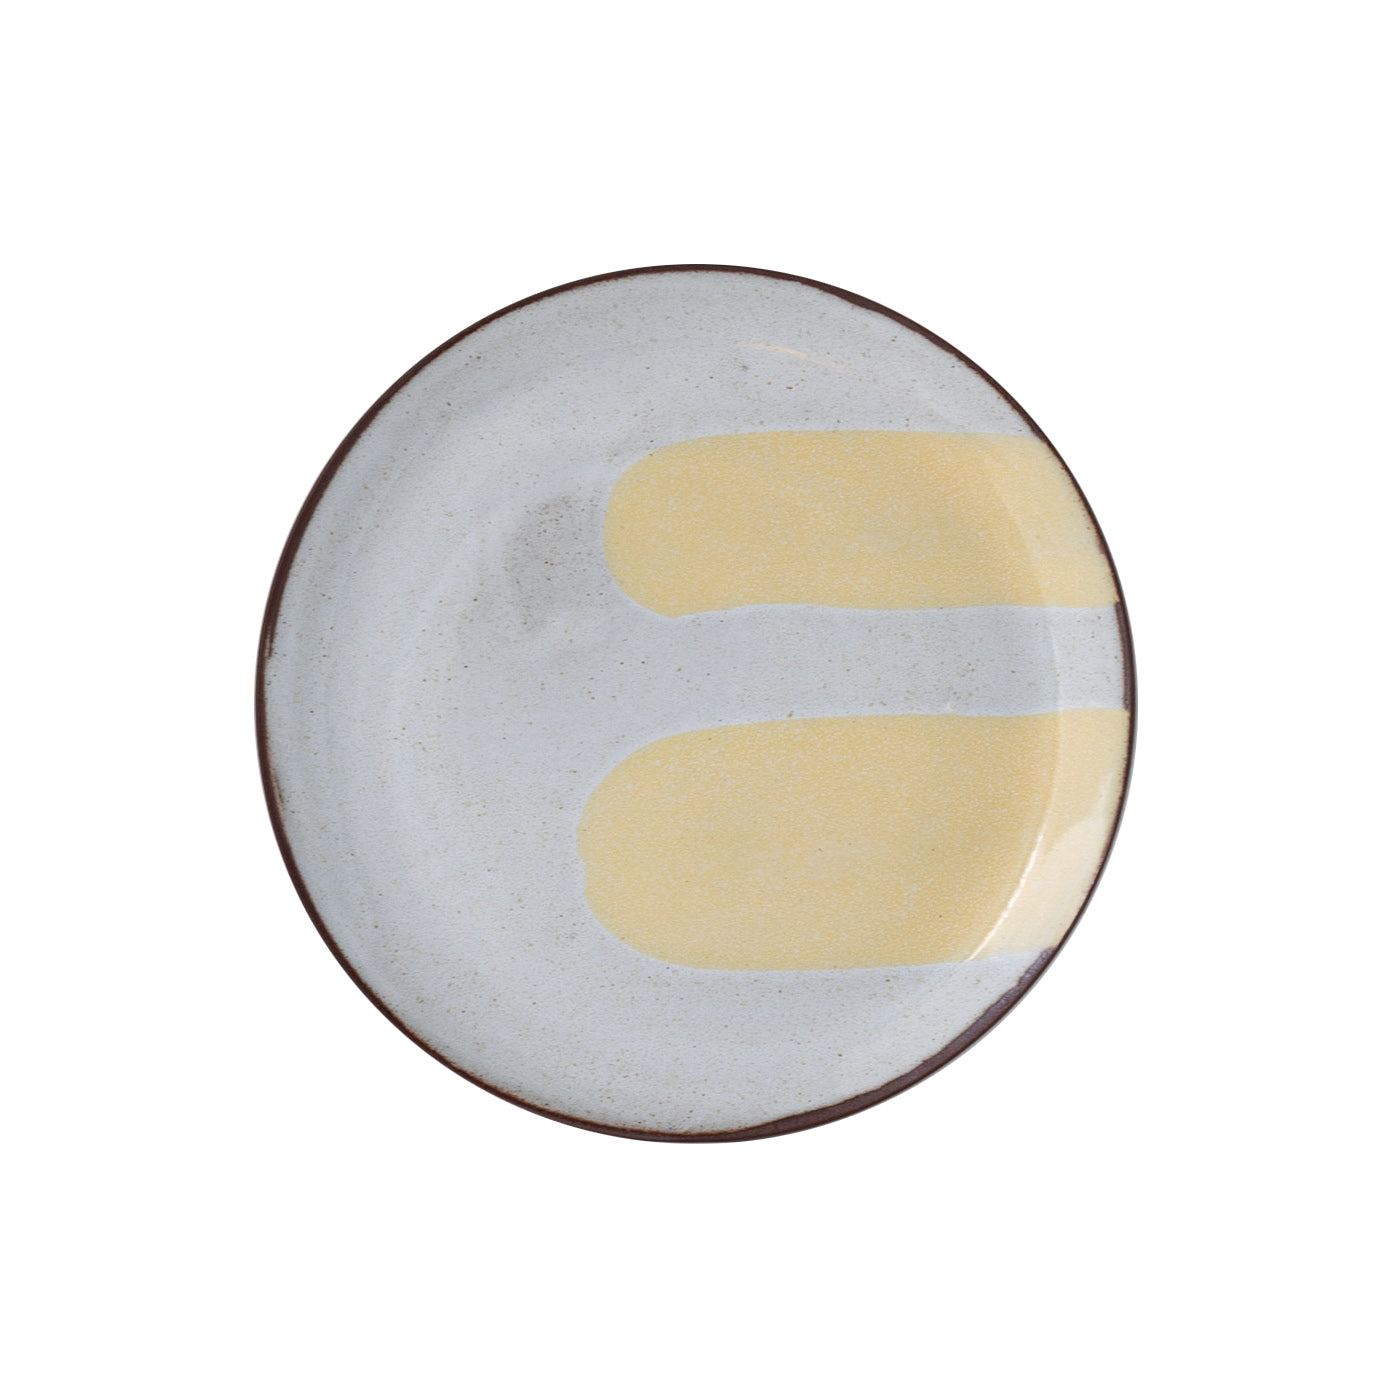 Silvia K hand made terracotta plate with white and 2 pale yellow decor